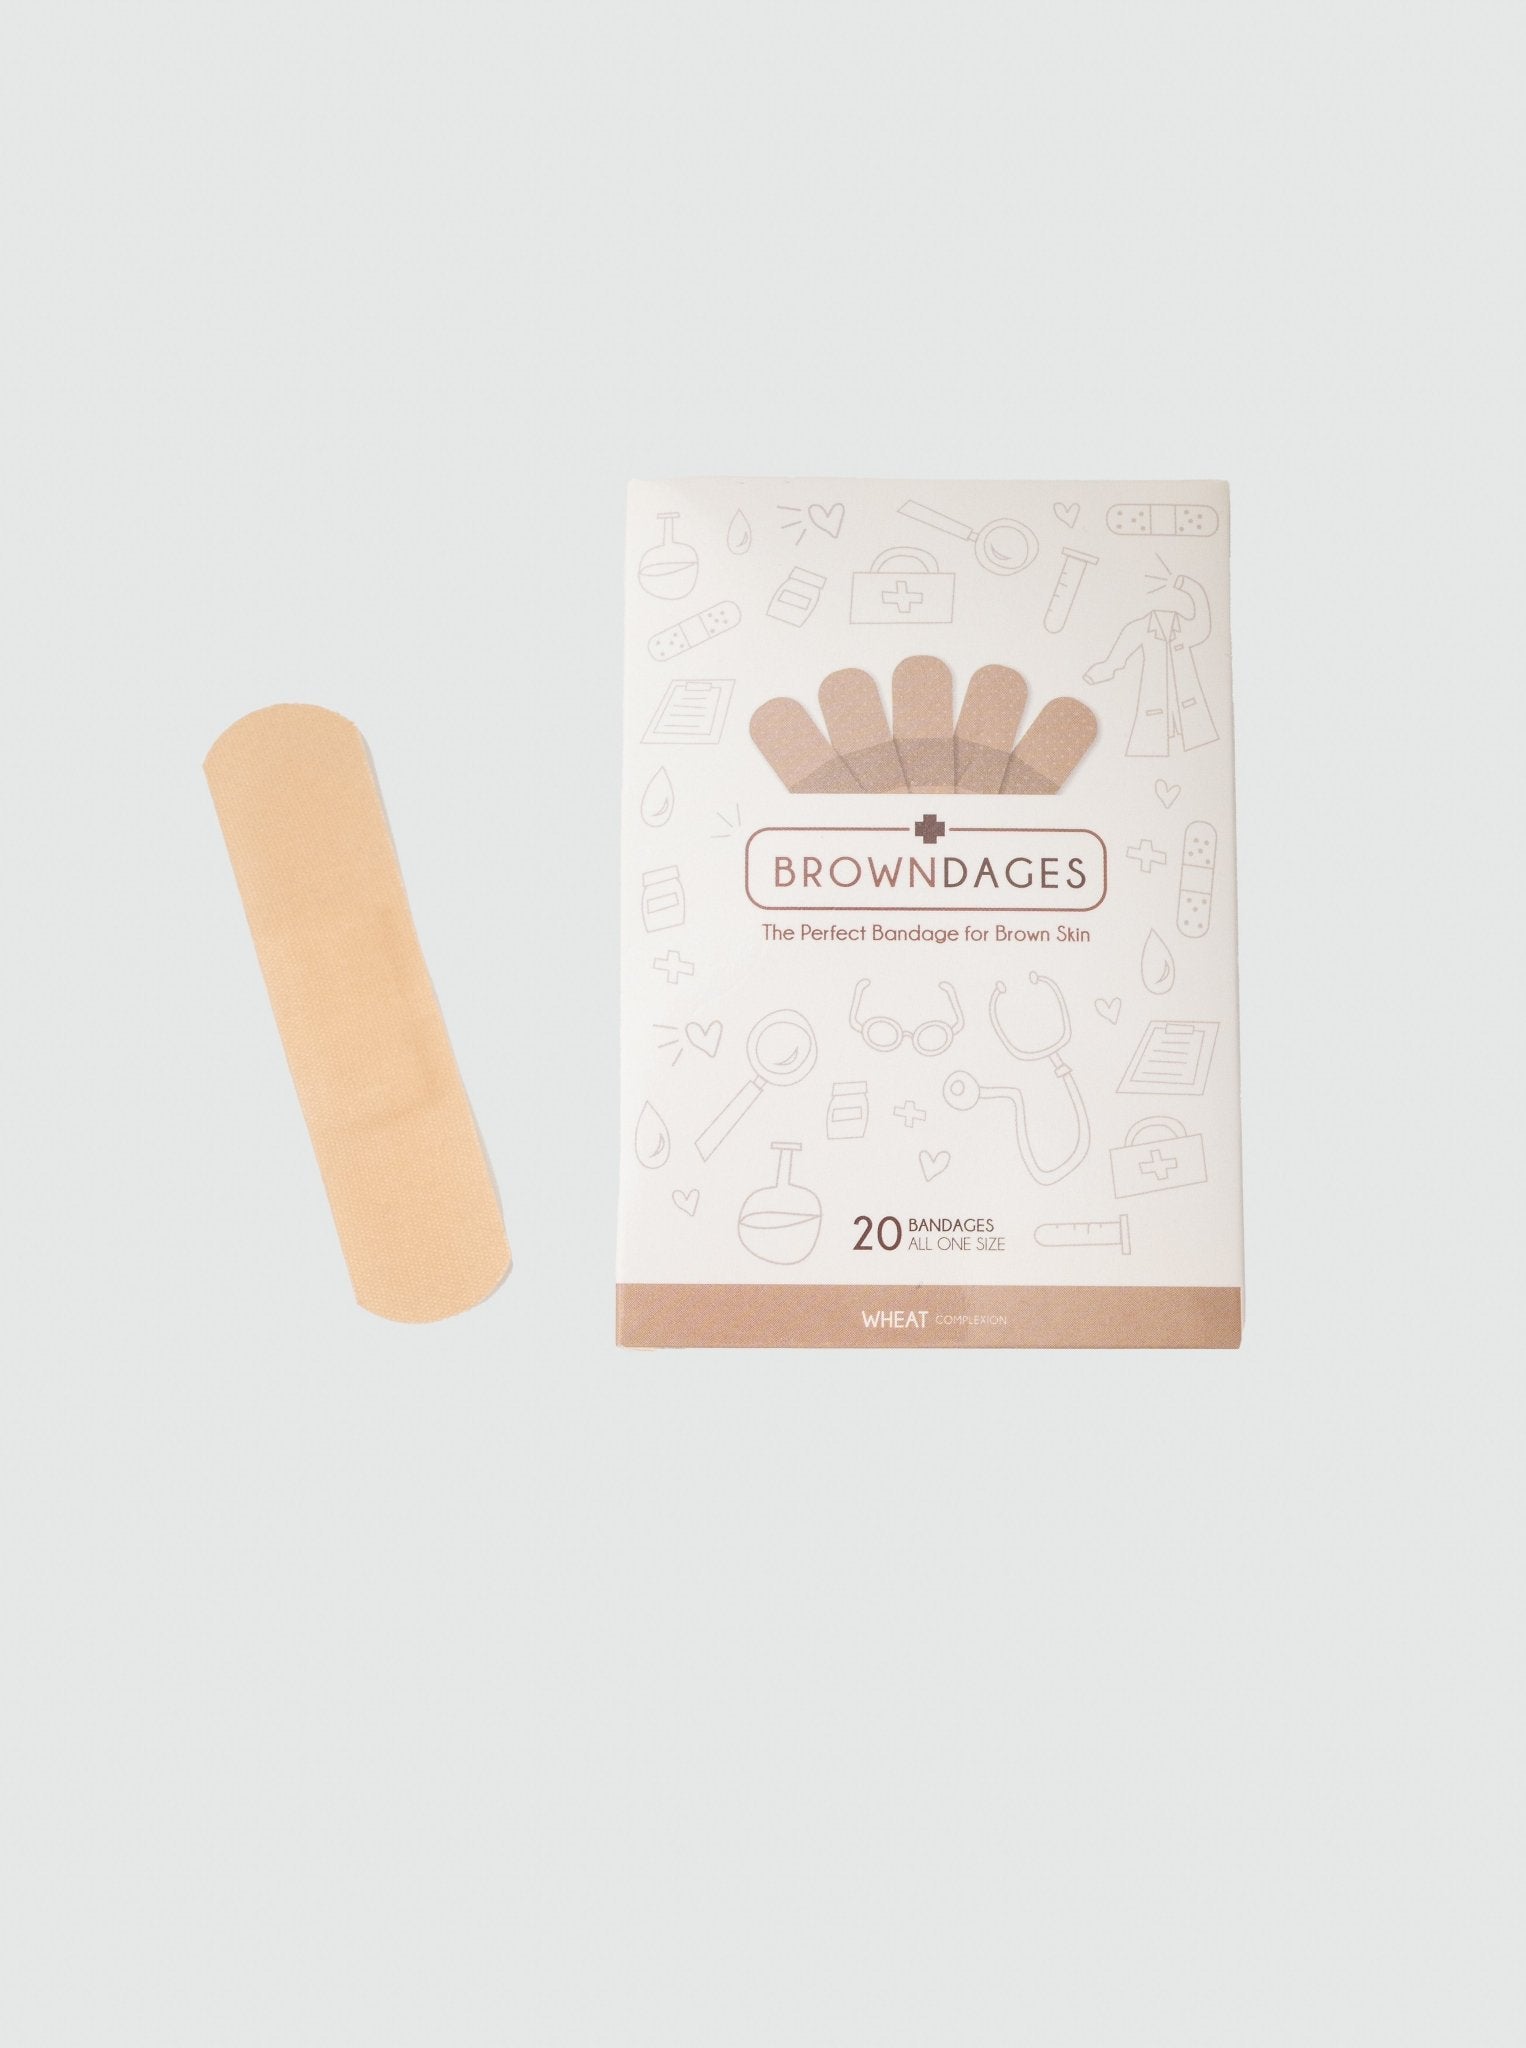 Warm beige-colored bandages by Browndages for tanned skin and body parts.